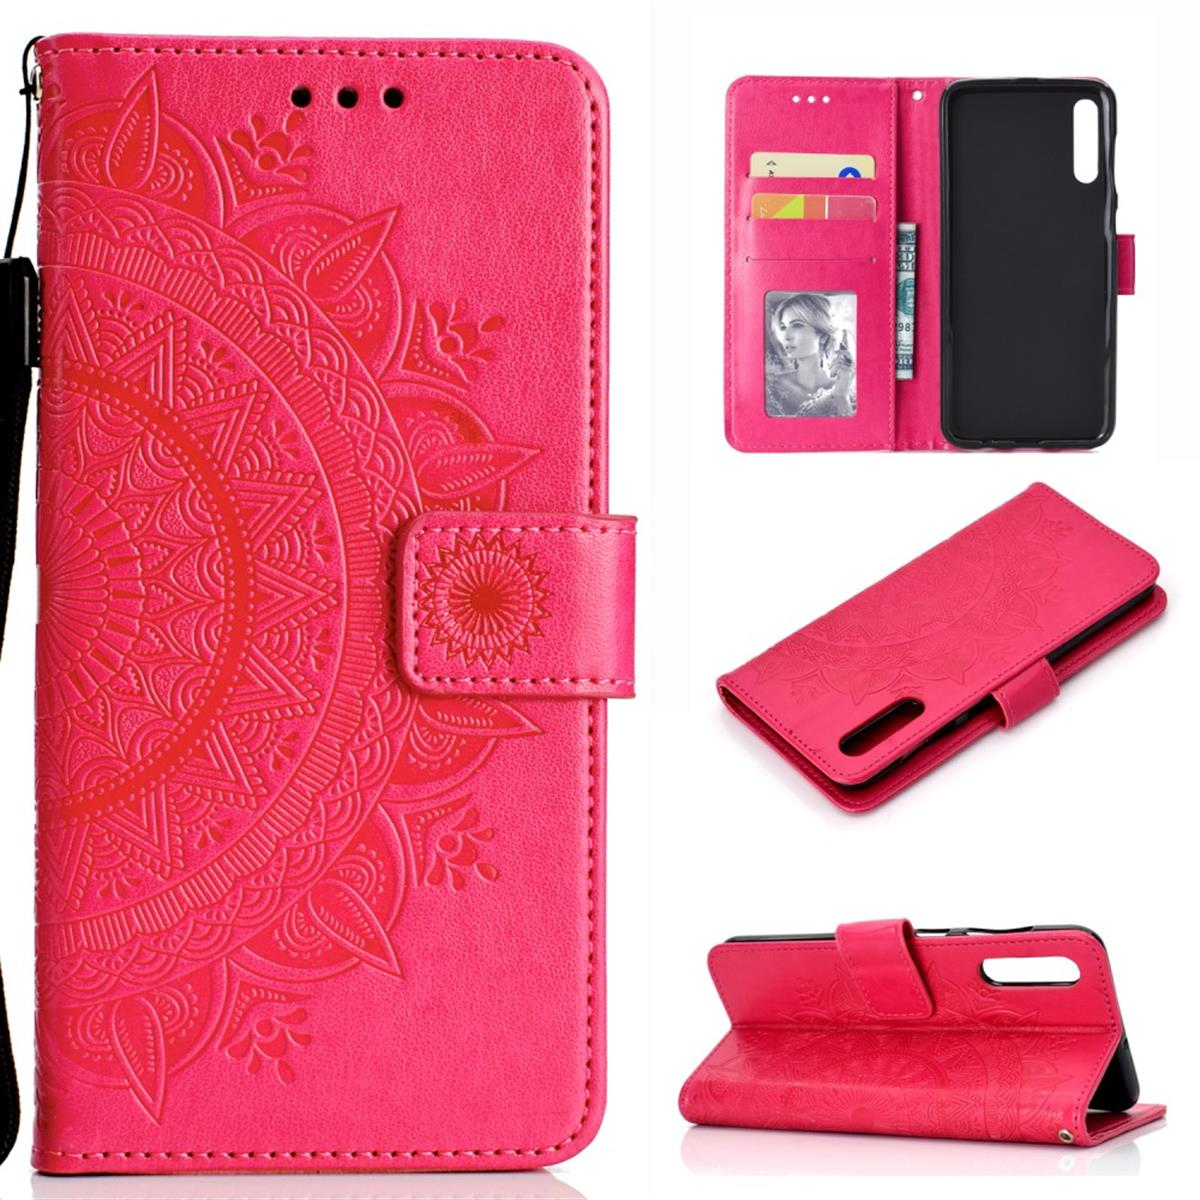 Muster, Bookcover, Samsung, COVERKINGZ Galaxy A50/A30s, Mandala Klapphülle Pink mit